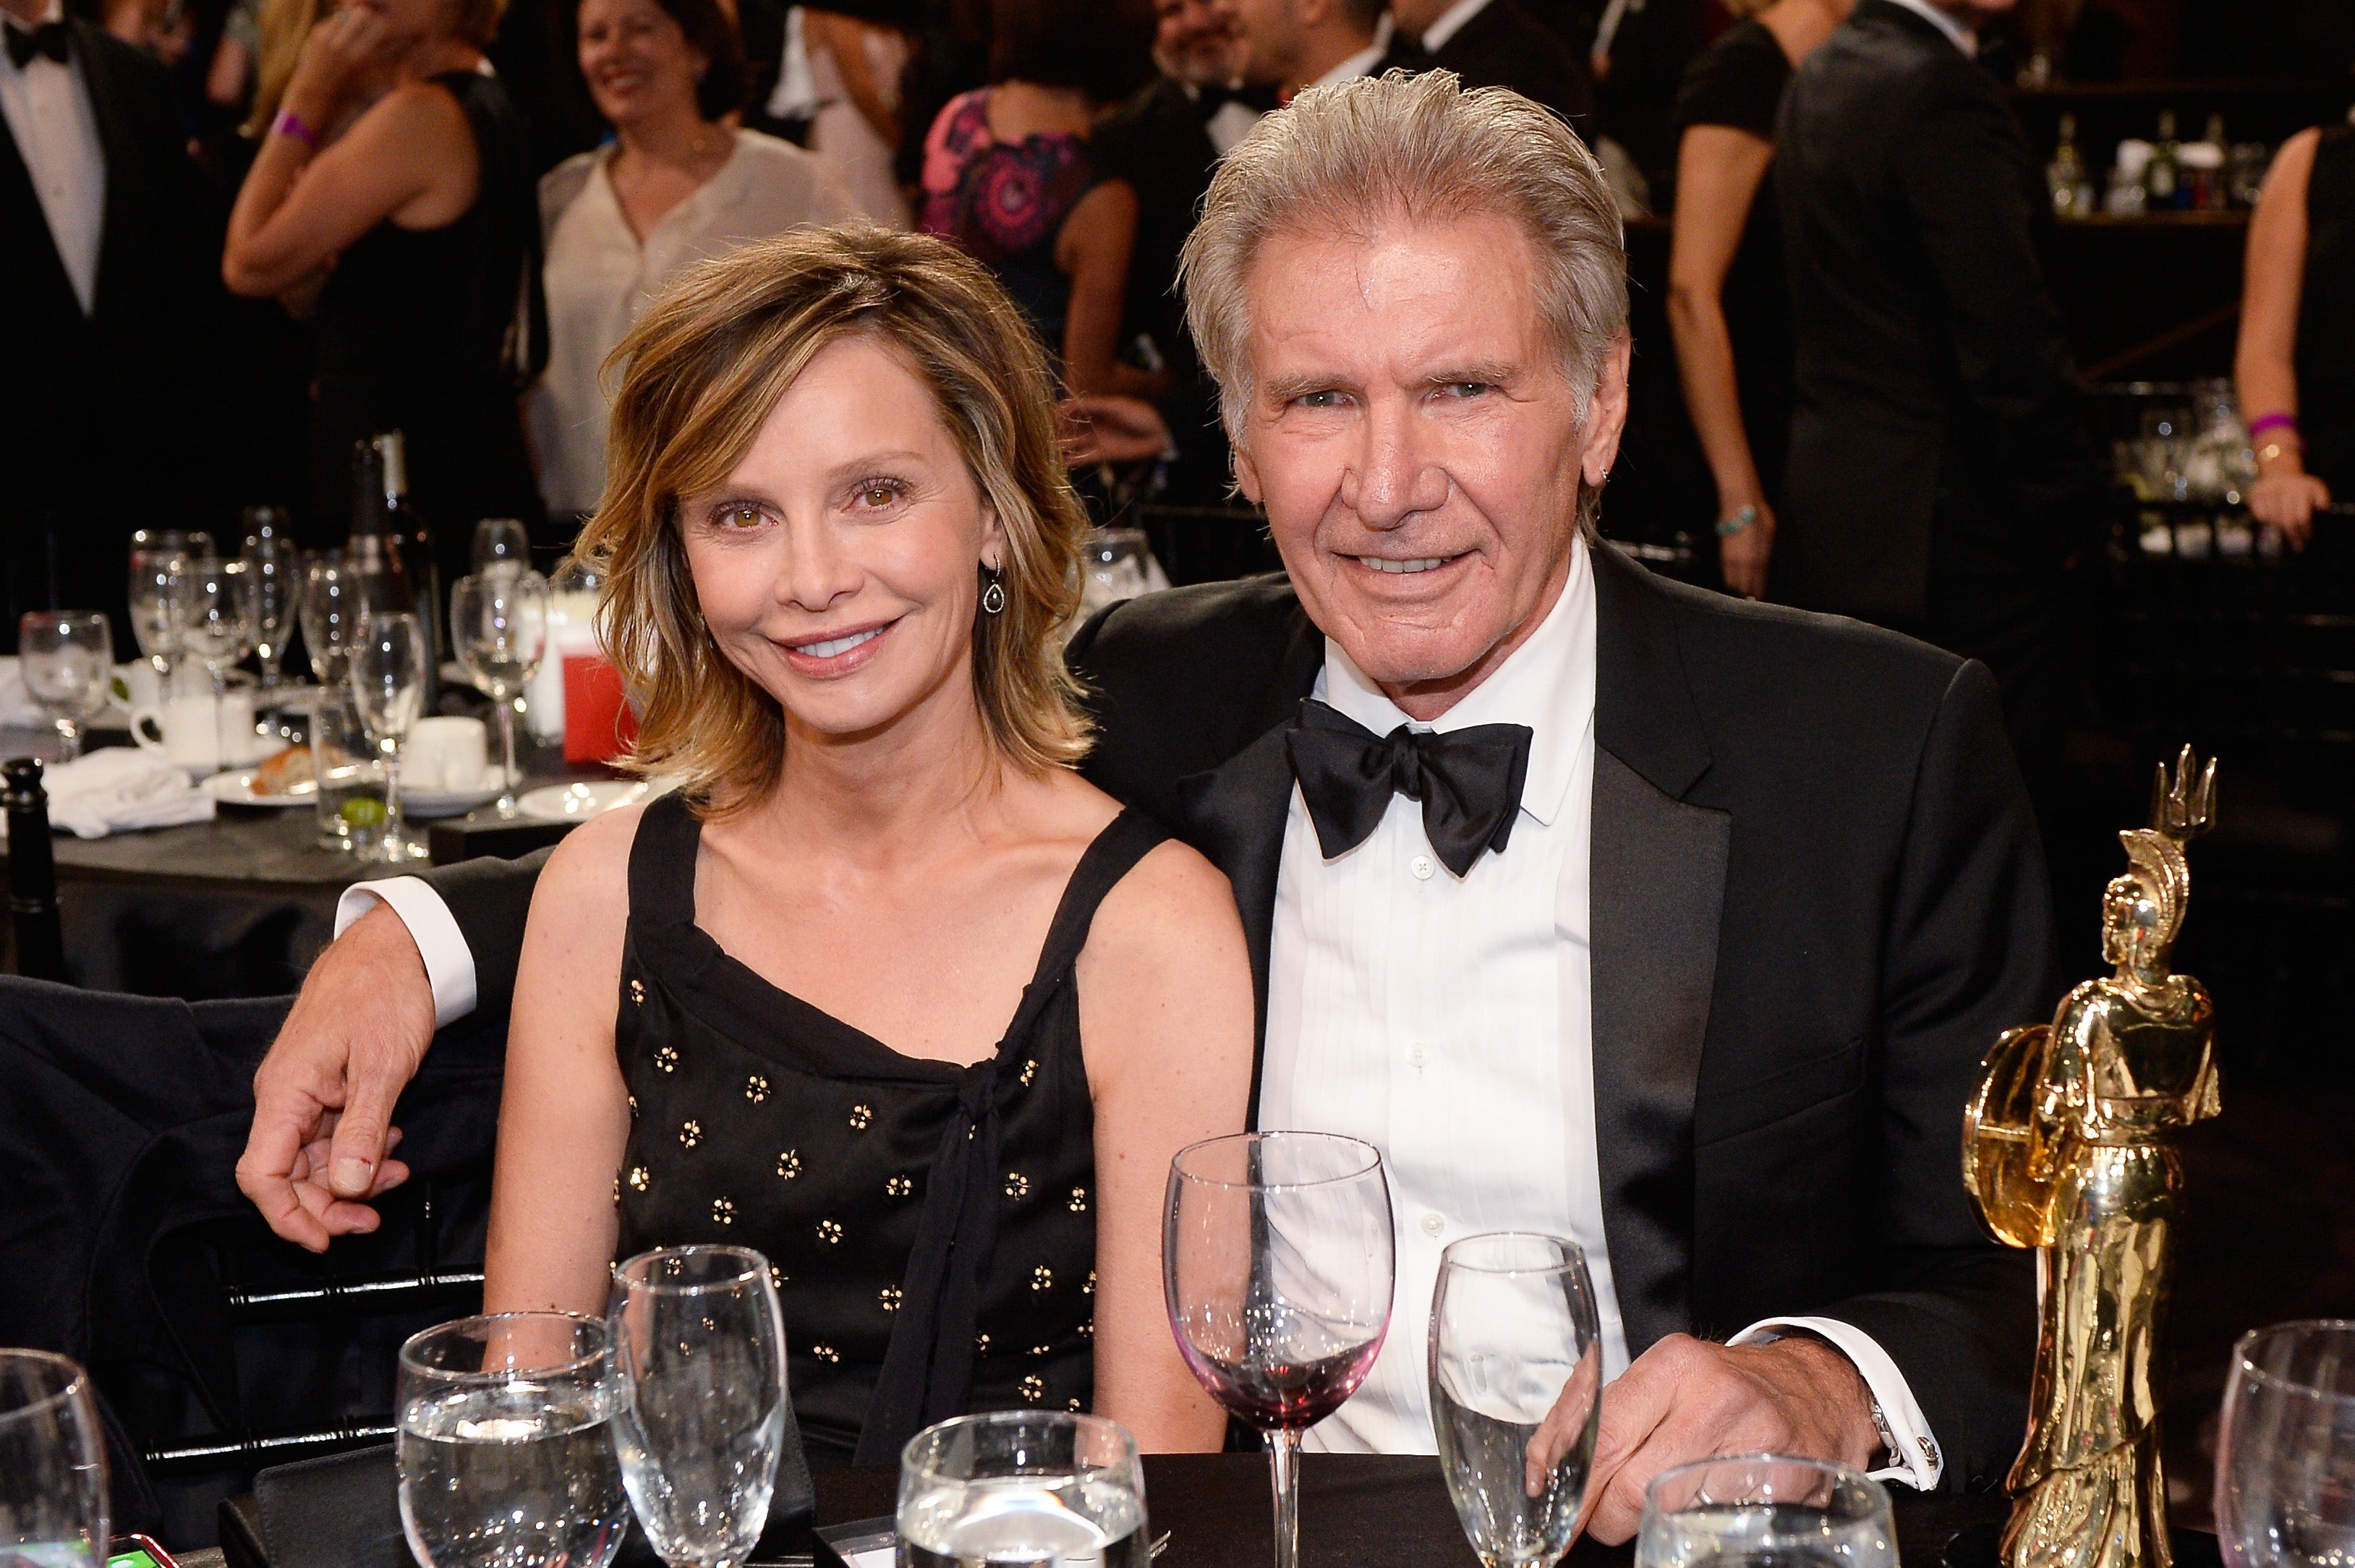 '1923' star Harrison Ford hopes to work with wife after she left the spotlight for 20 years to raise their son - Fox News